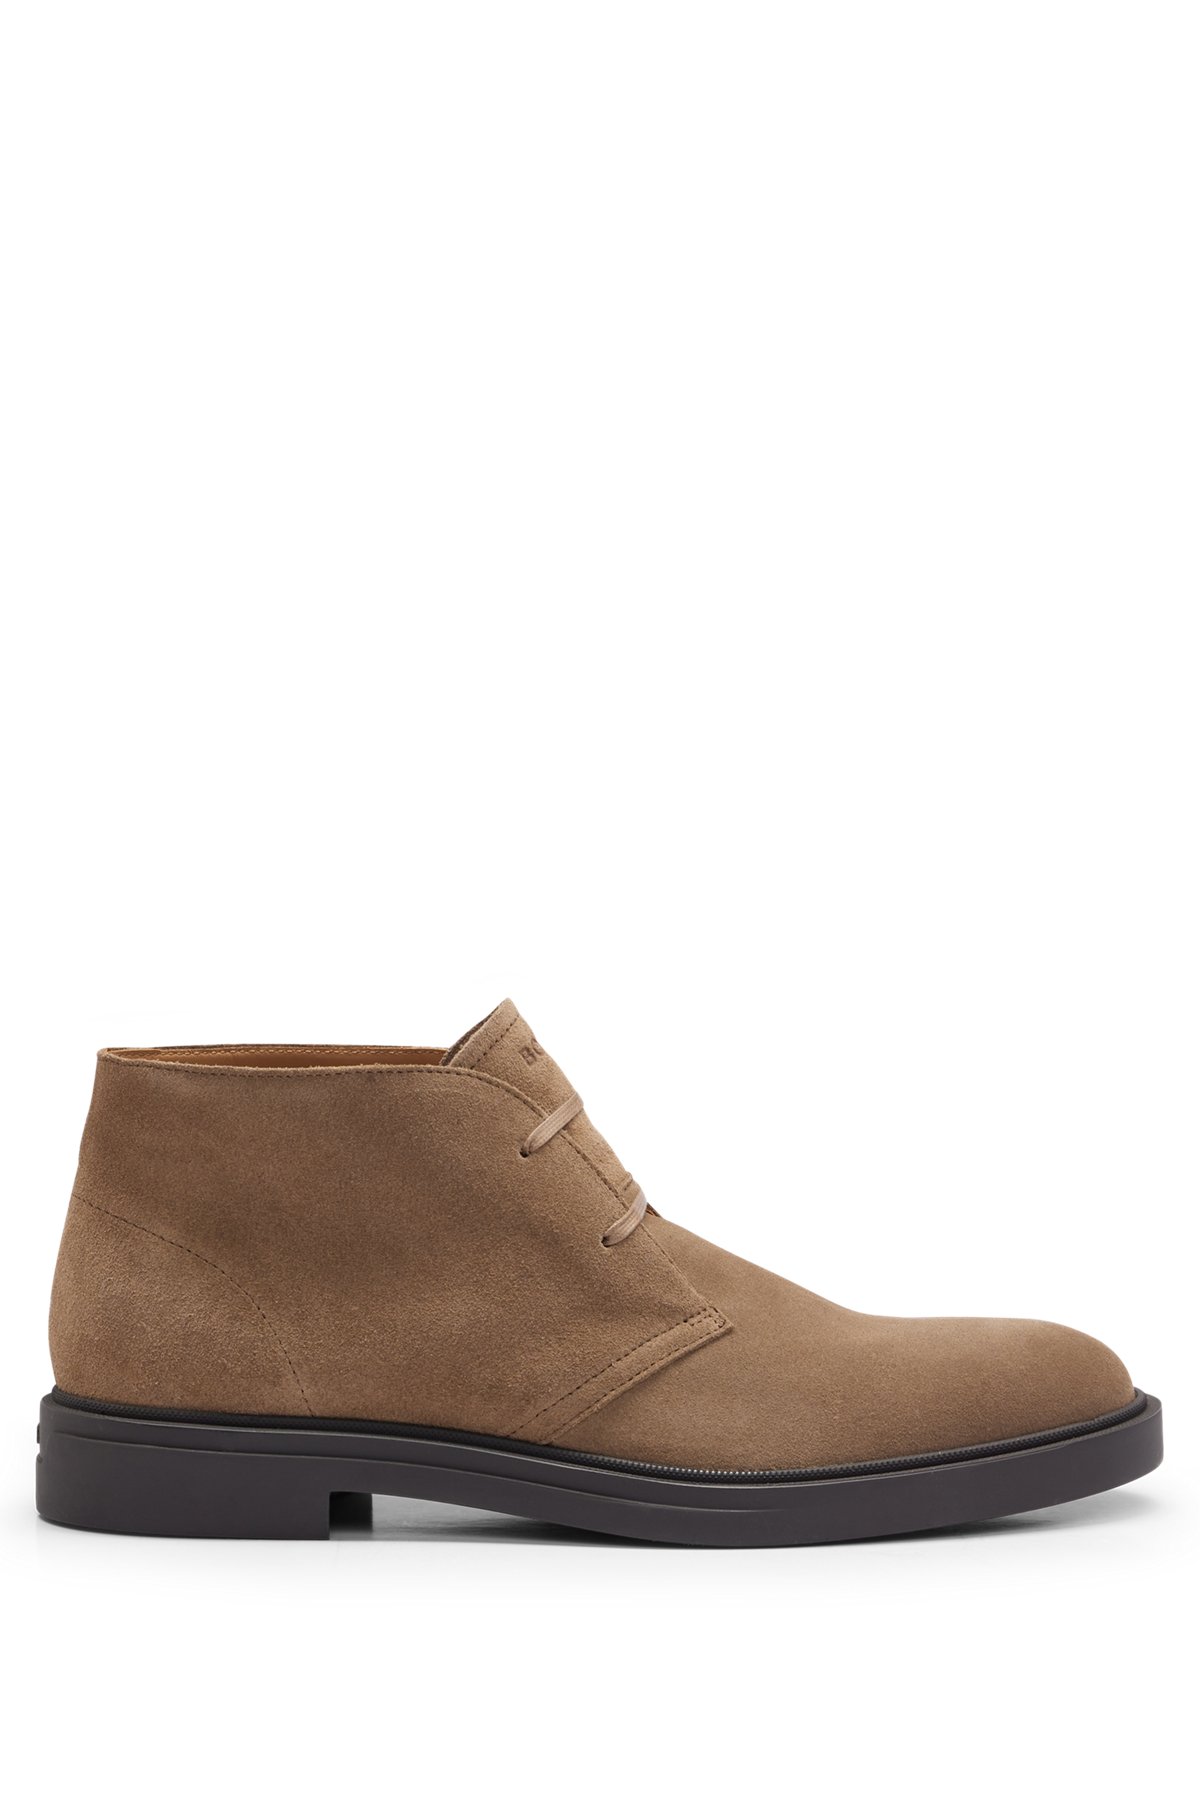 Suede desert boots with signature-stripe detail, Light Brown